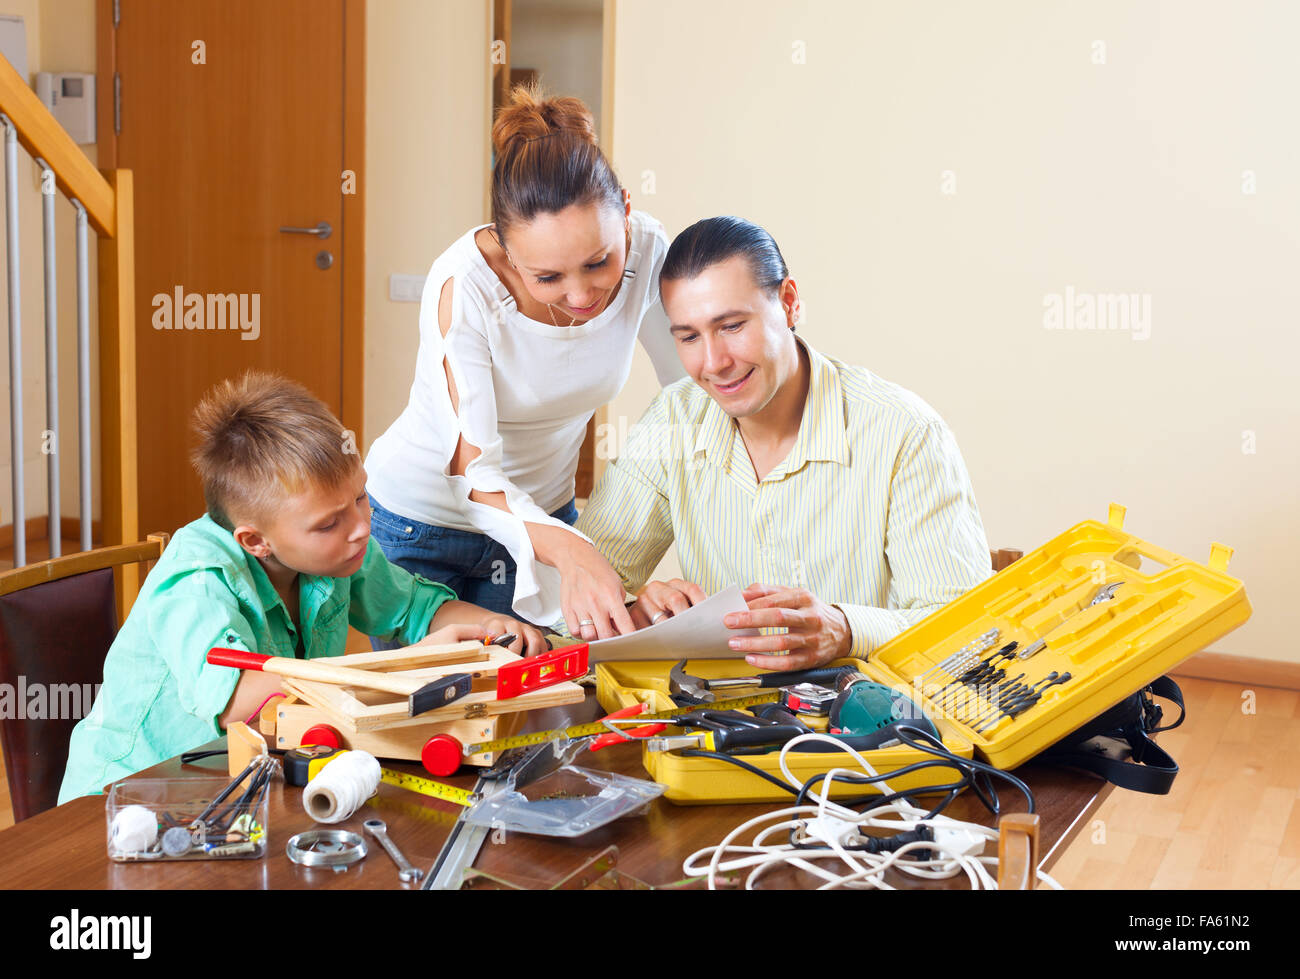 Man with son doing something with working tools, happy woman watching them in home Stock Photo